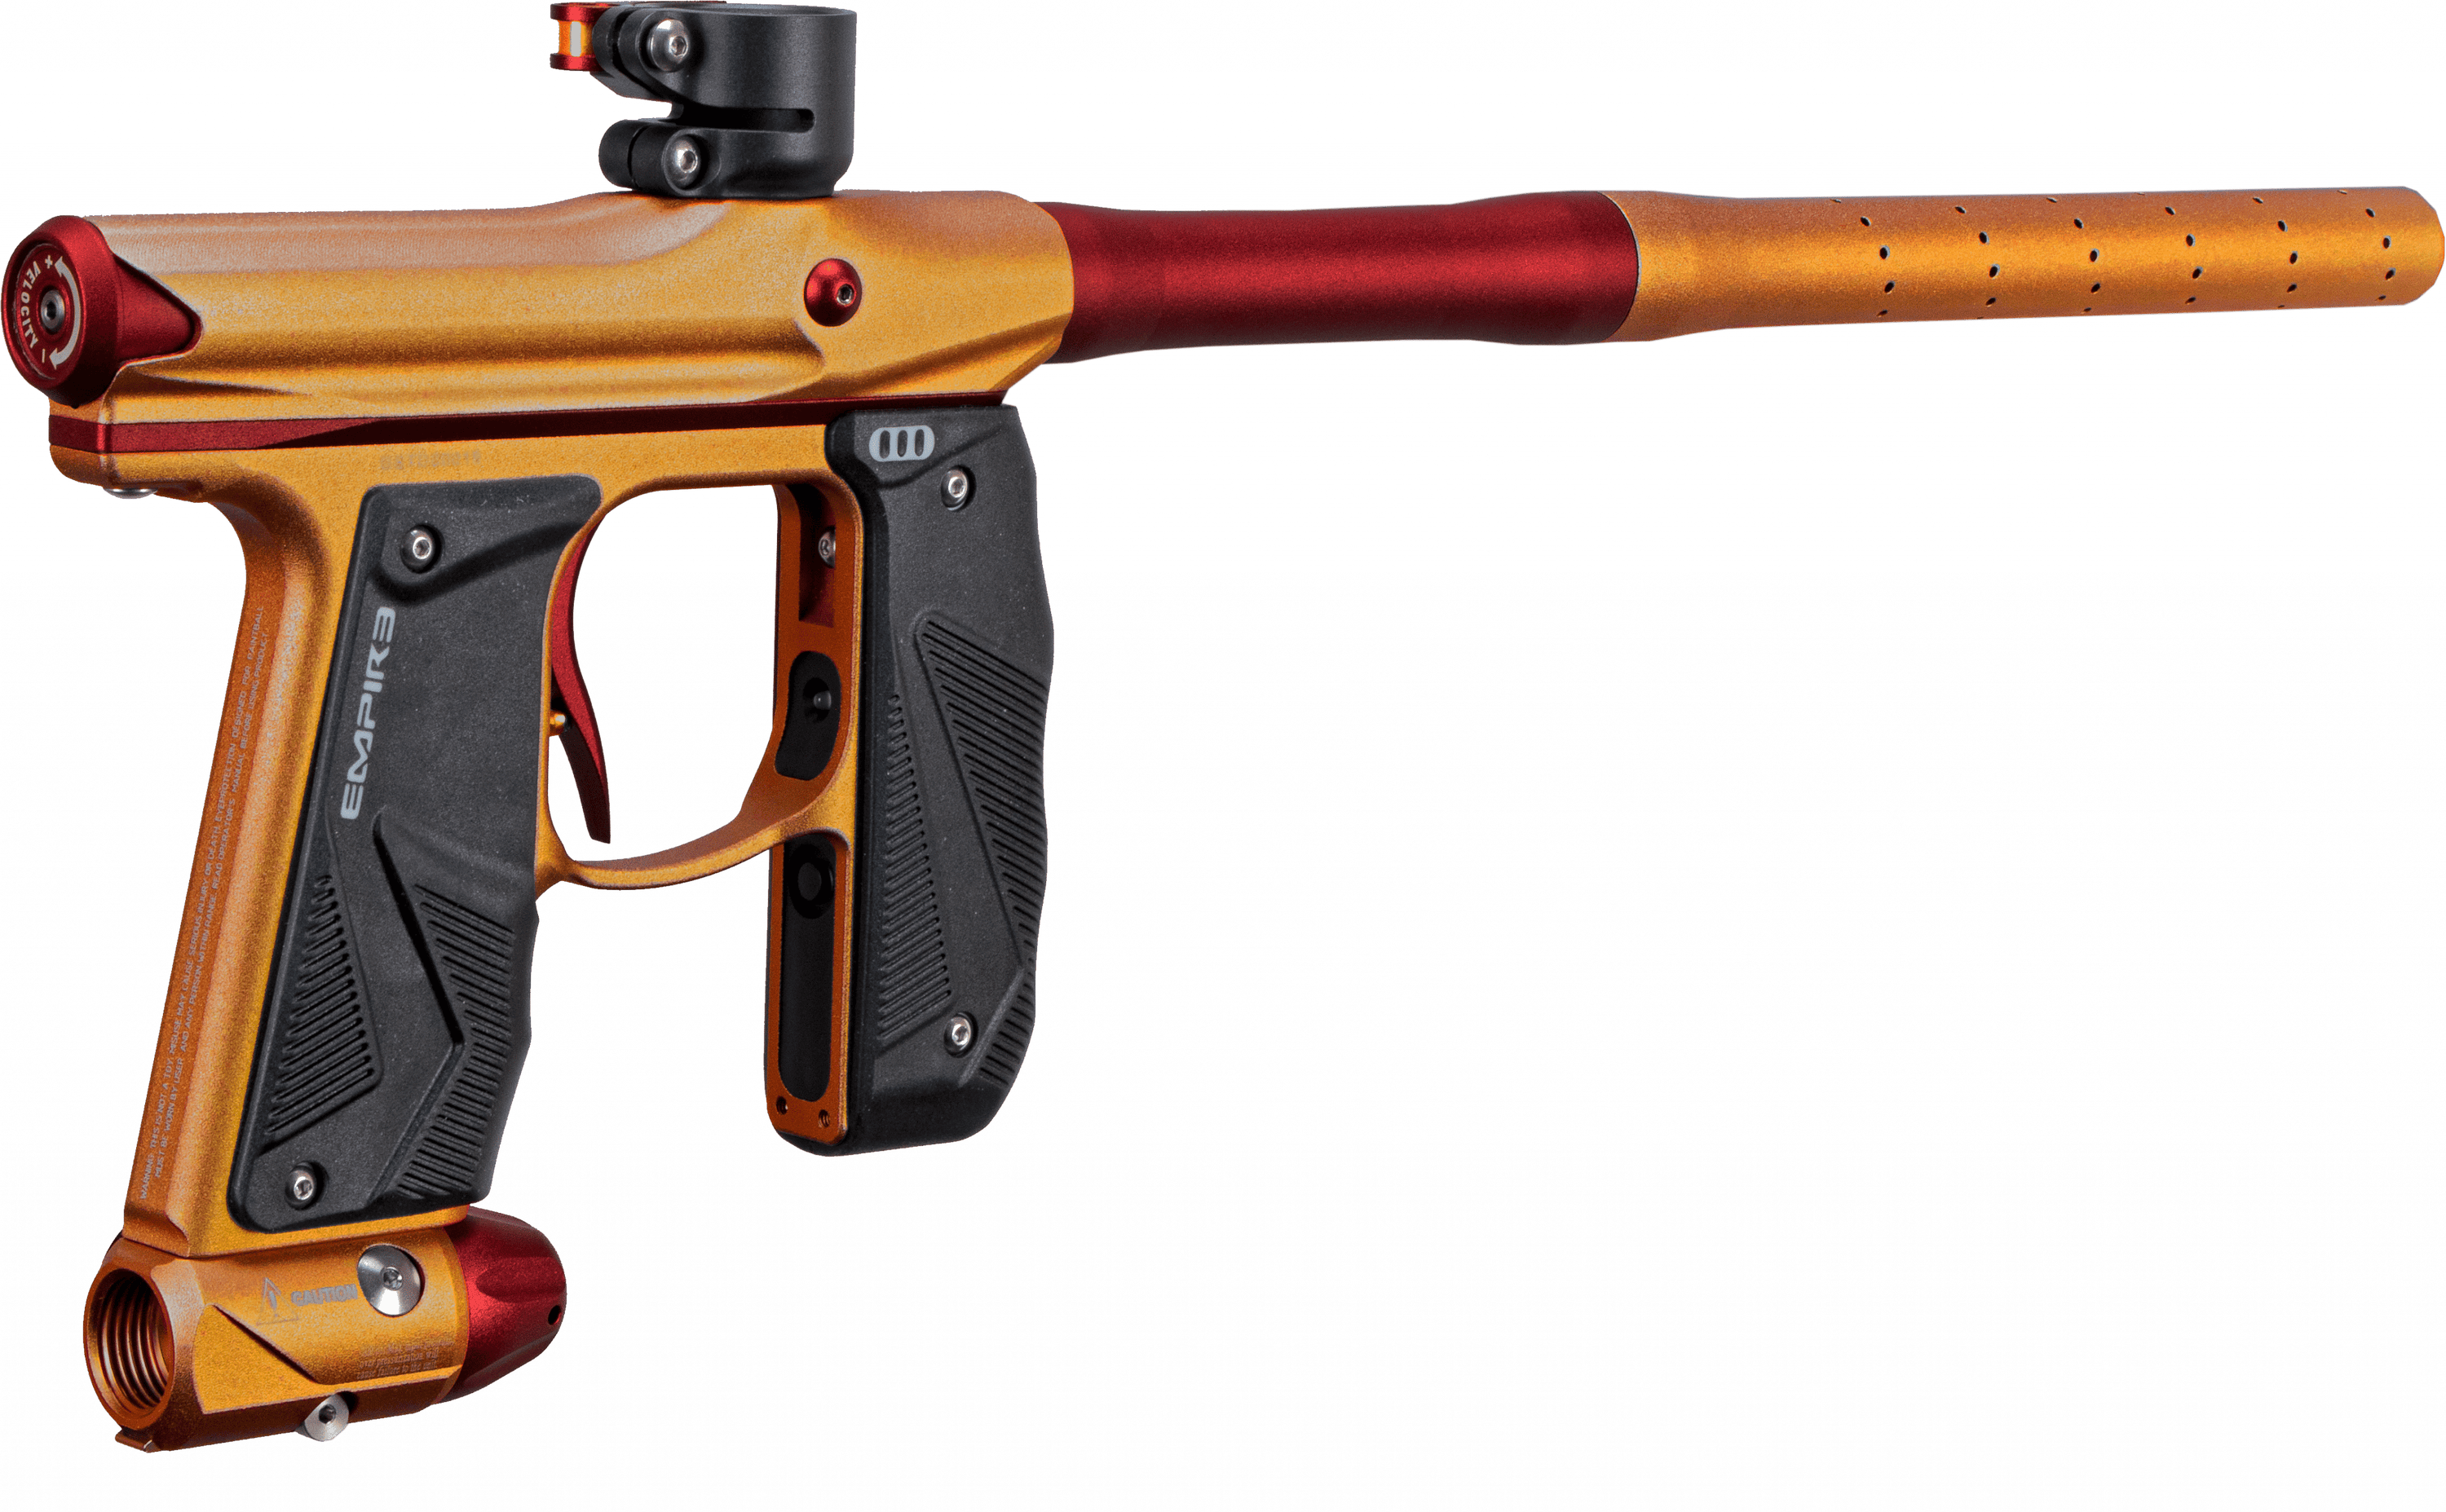 EMPIRE MINI GS PAINTBALL GUN W/ TWO PIECE BARREL- DUST ORANGE/DUST RED - Eminent Paintball And Airsoft